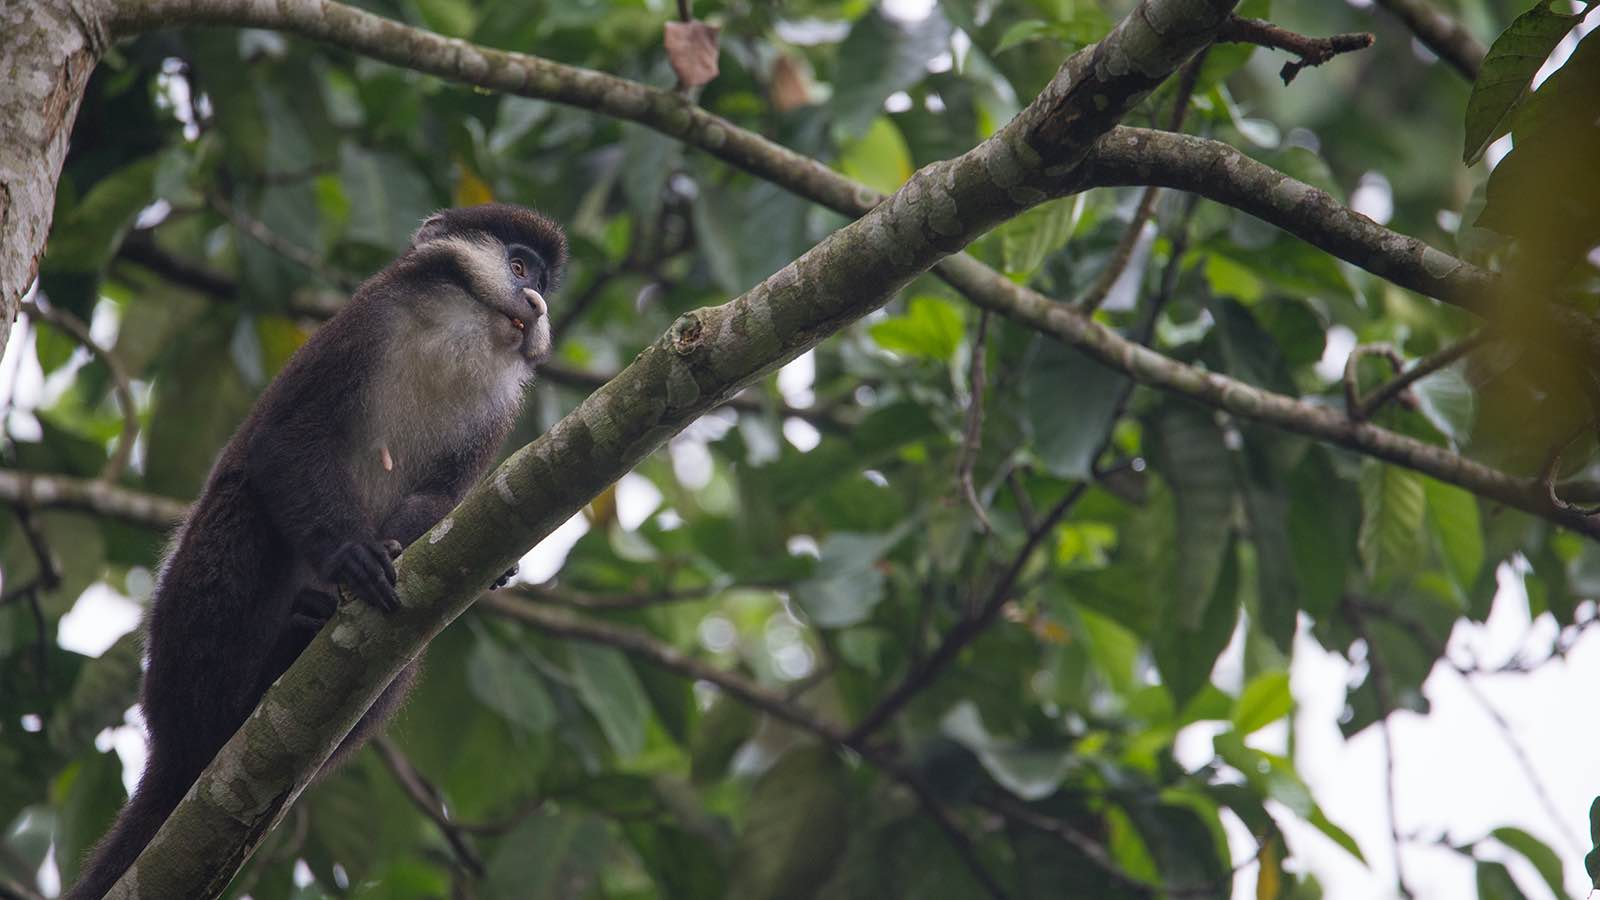 red-tailed monkey foraging in a tree in Kibale Forest